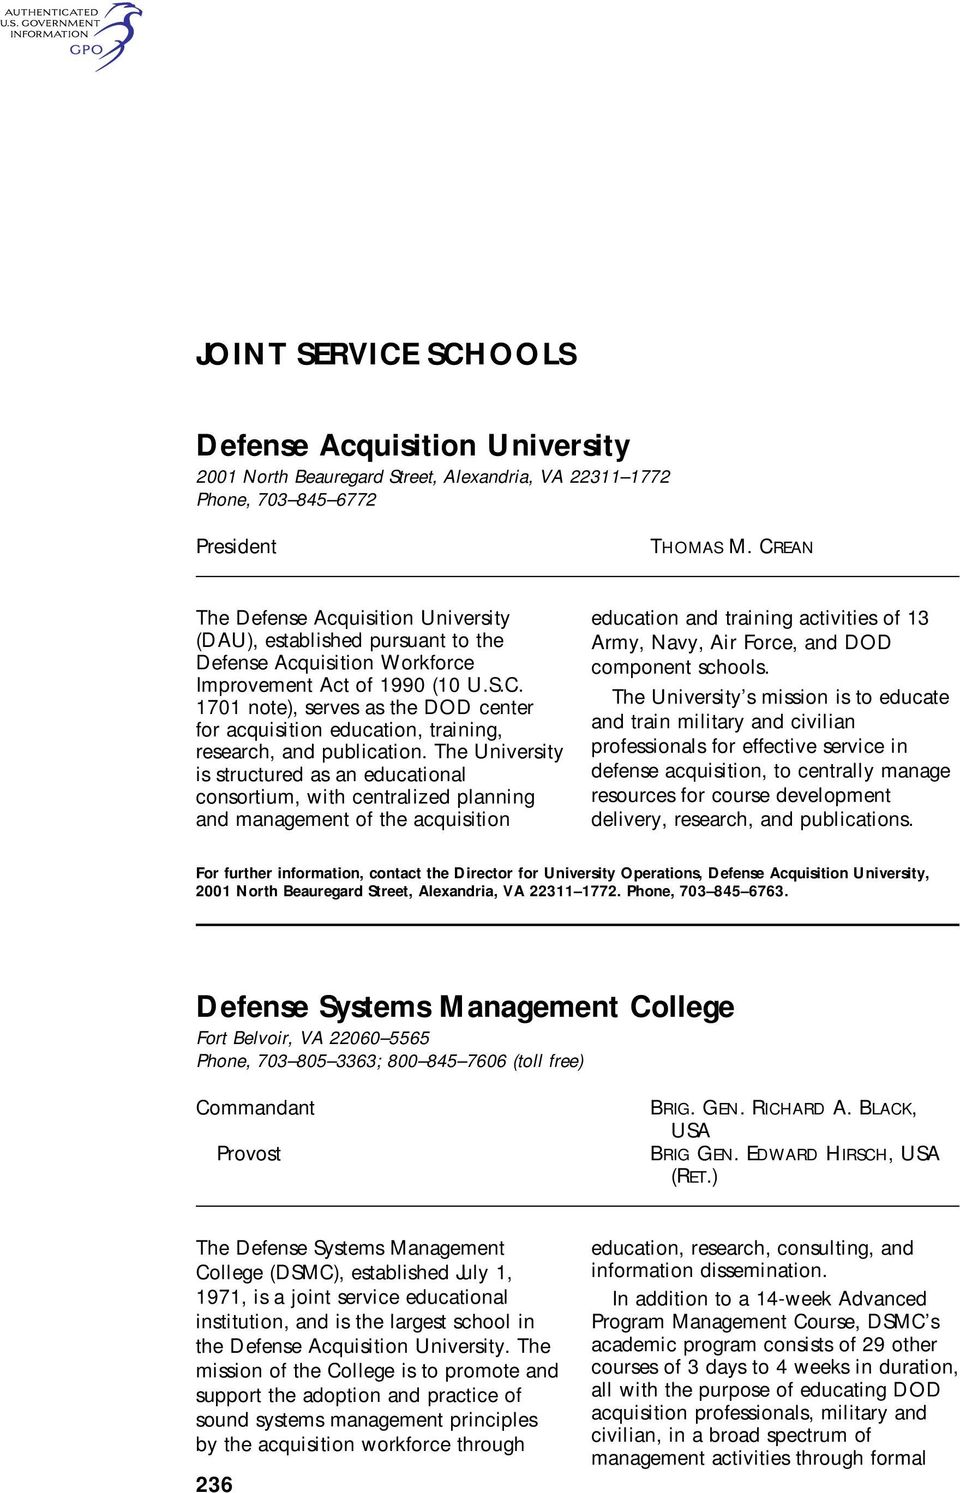 The University is structured as an educational consortium, with centralized planning and management of the acquisition education and training activities of 13 Army, Navy, Air Force, and DOD component